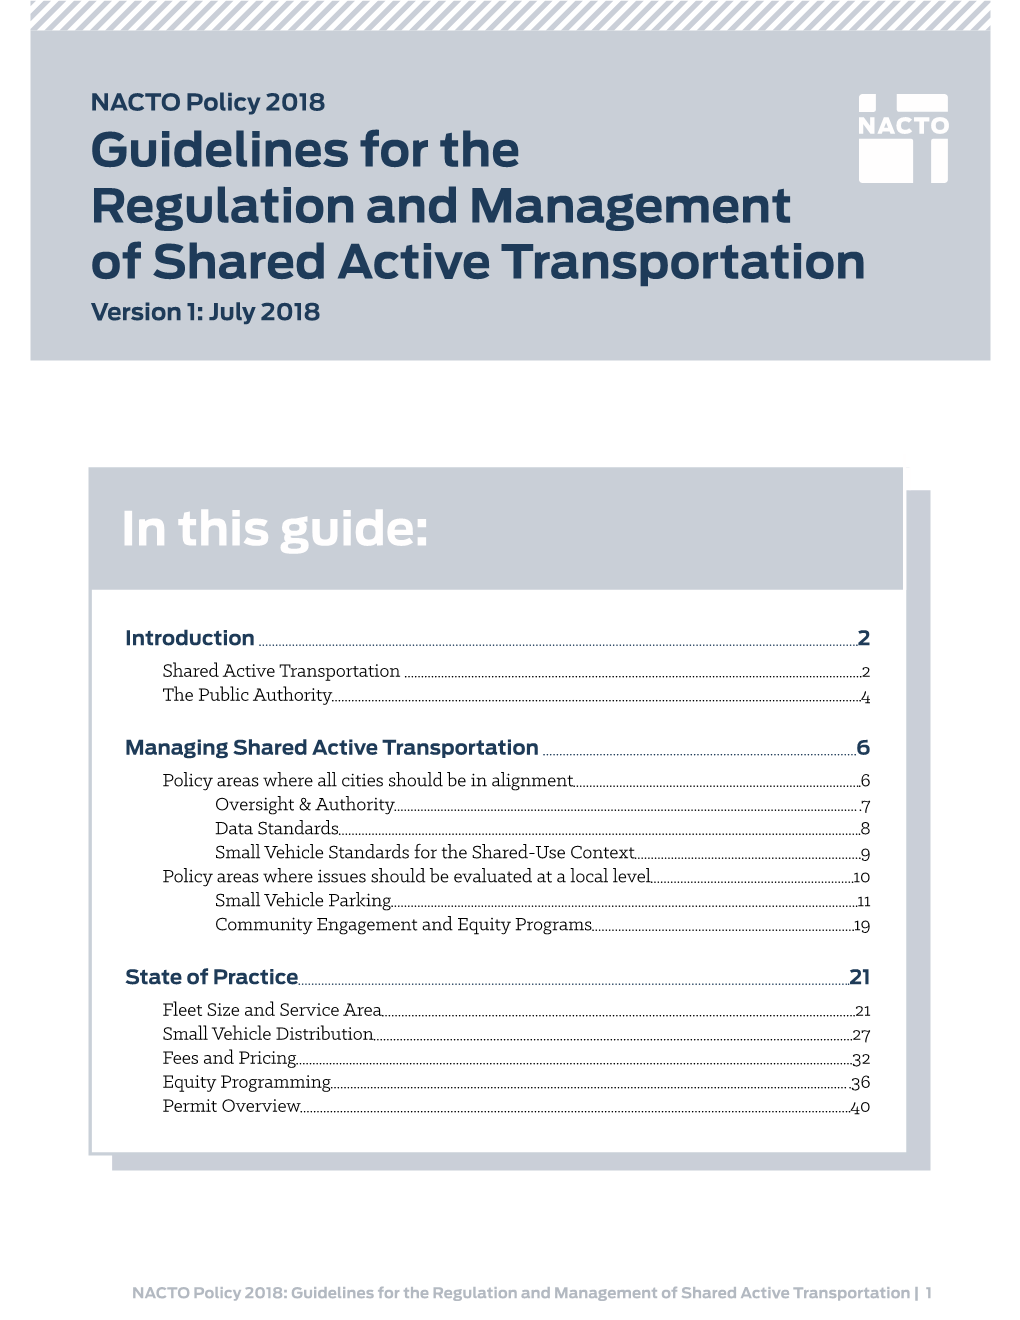 Guidelines for the Regulation and Management of Shared Active Transportation Version 1: July 2018